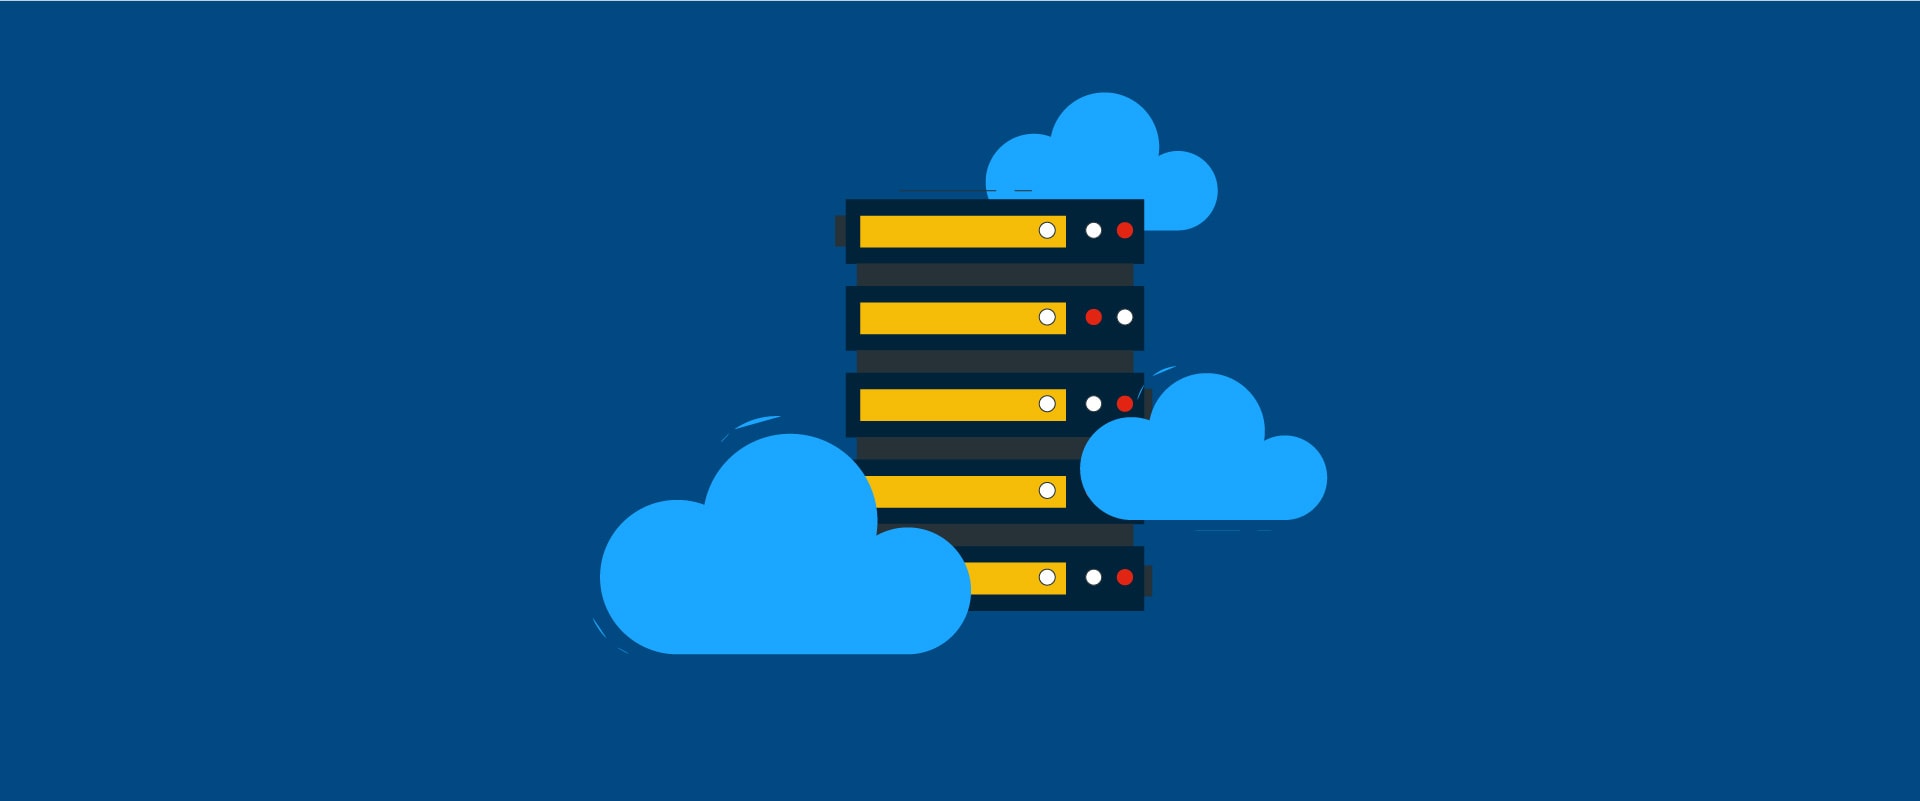 VPS or Cloud? How can VPS service providers offer better services to their customers?